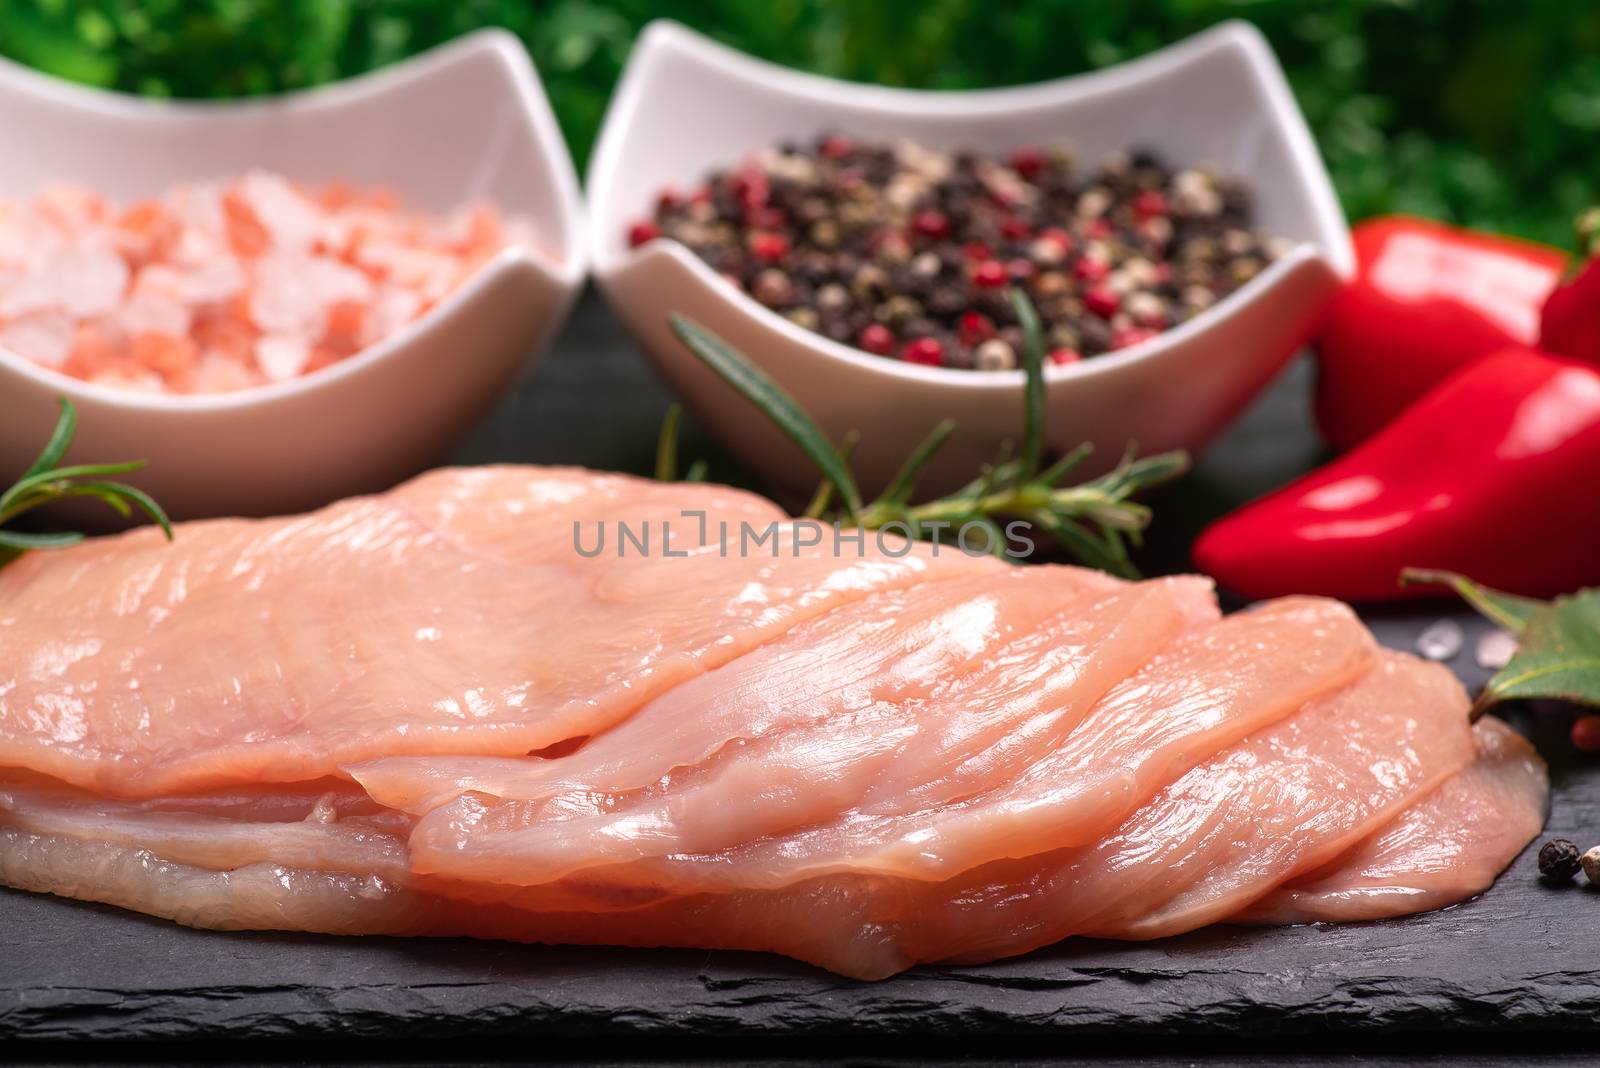 Raw chicken slices on a wooden table with raw vegetables and spices. Satilisimo. Delicious dietary meat. Close-up view of raw, fresh, choped and sliced chicken meat. Cooking,raw sliced chicken breast. by nkooume